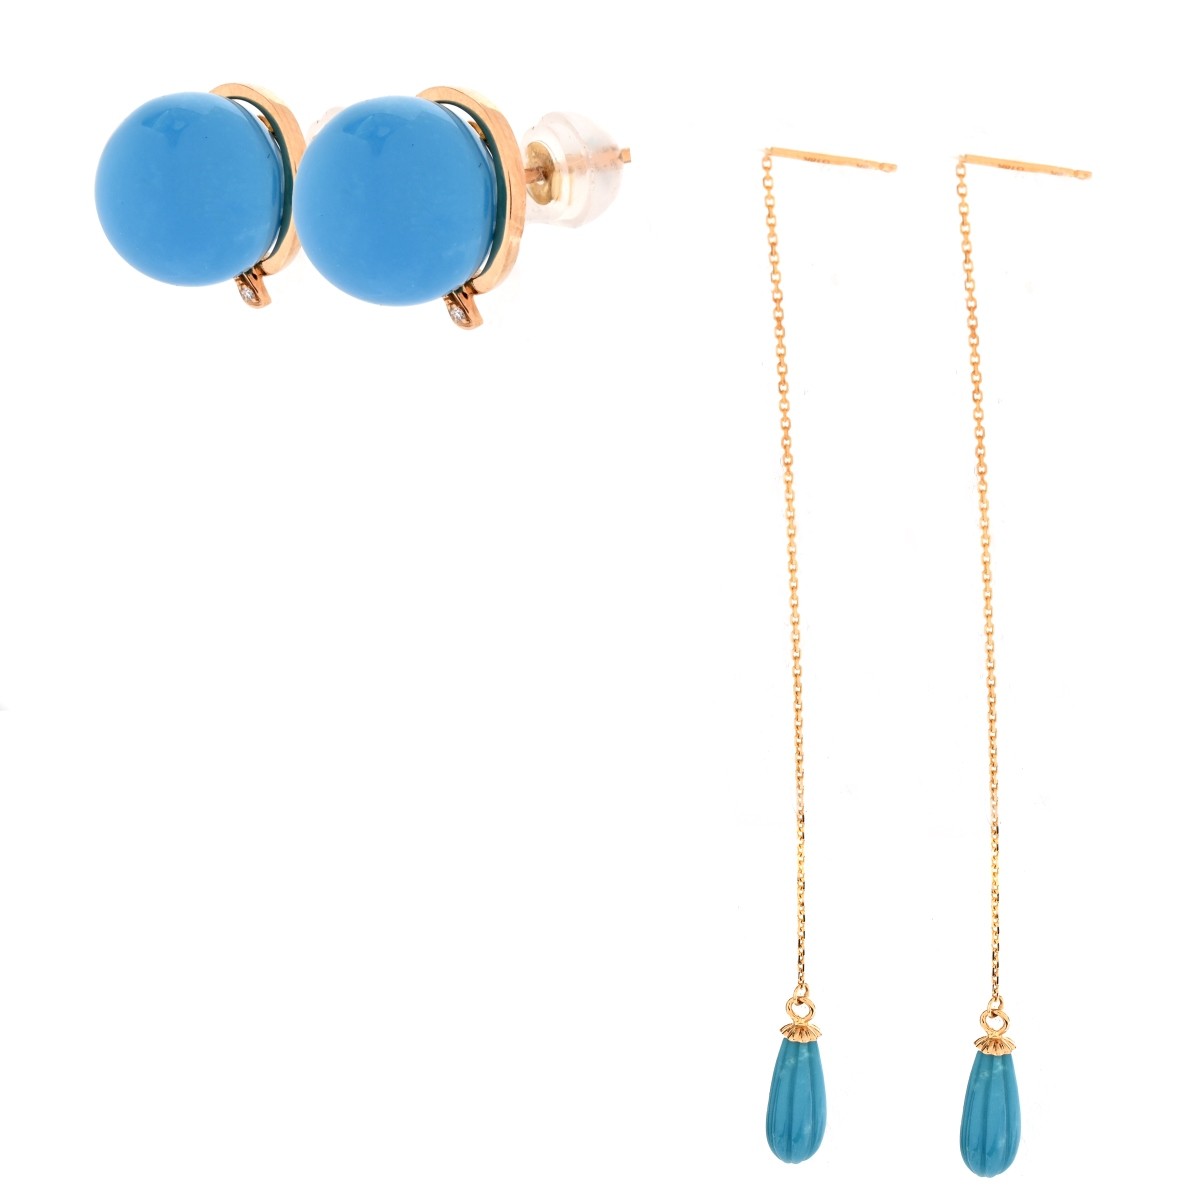 Two Pair Turquoise 18K Gold Earrings